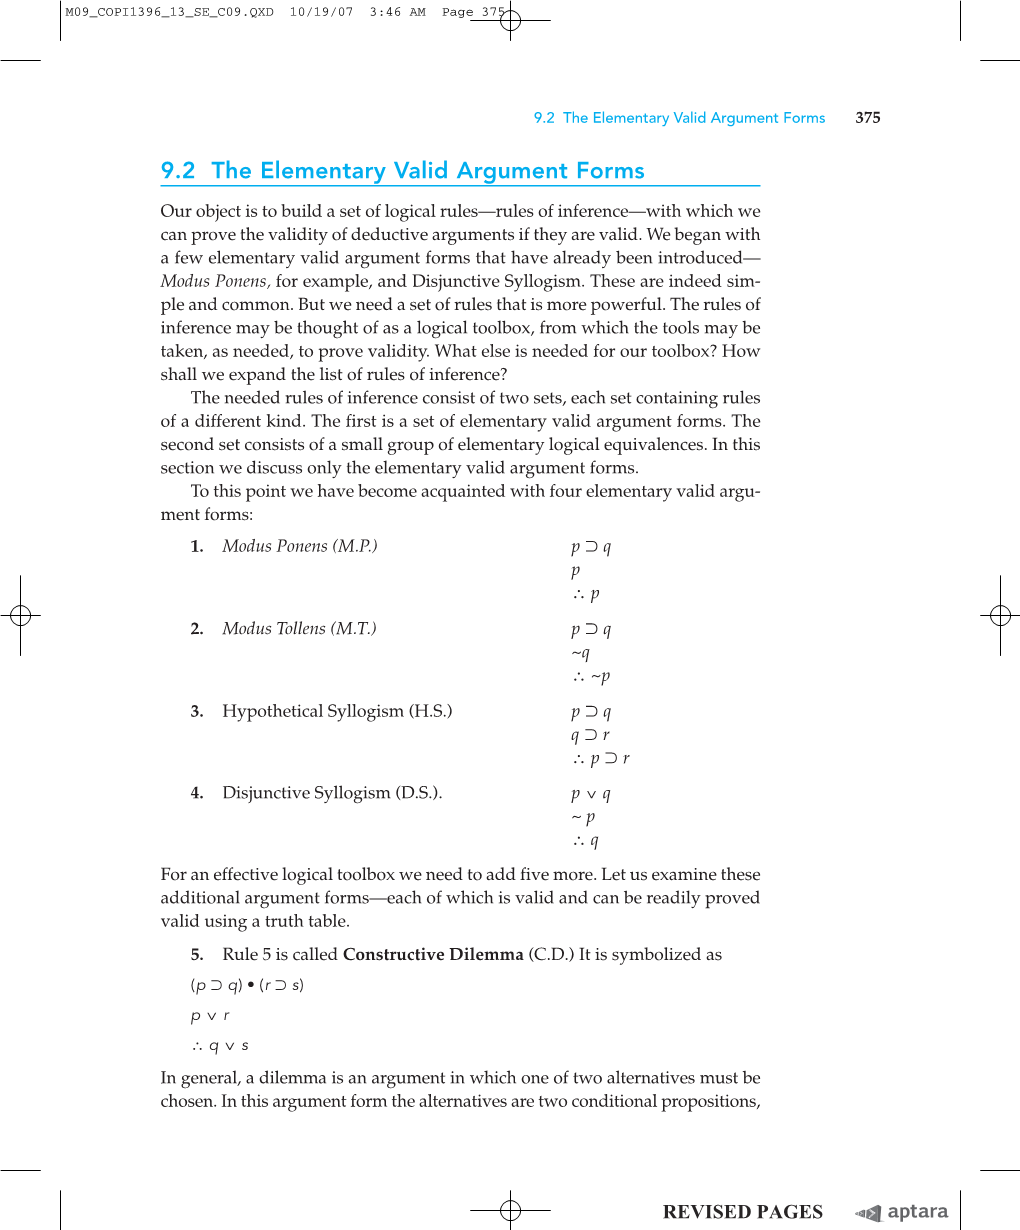 9.2 the Elementary Valid Argument Forms 375